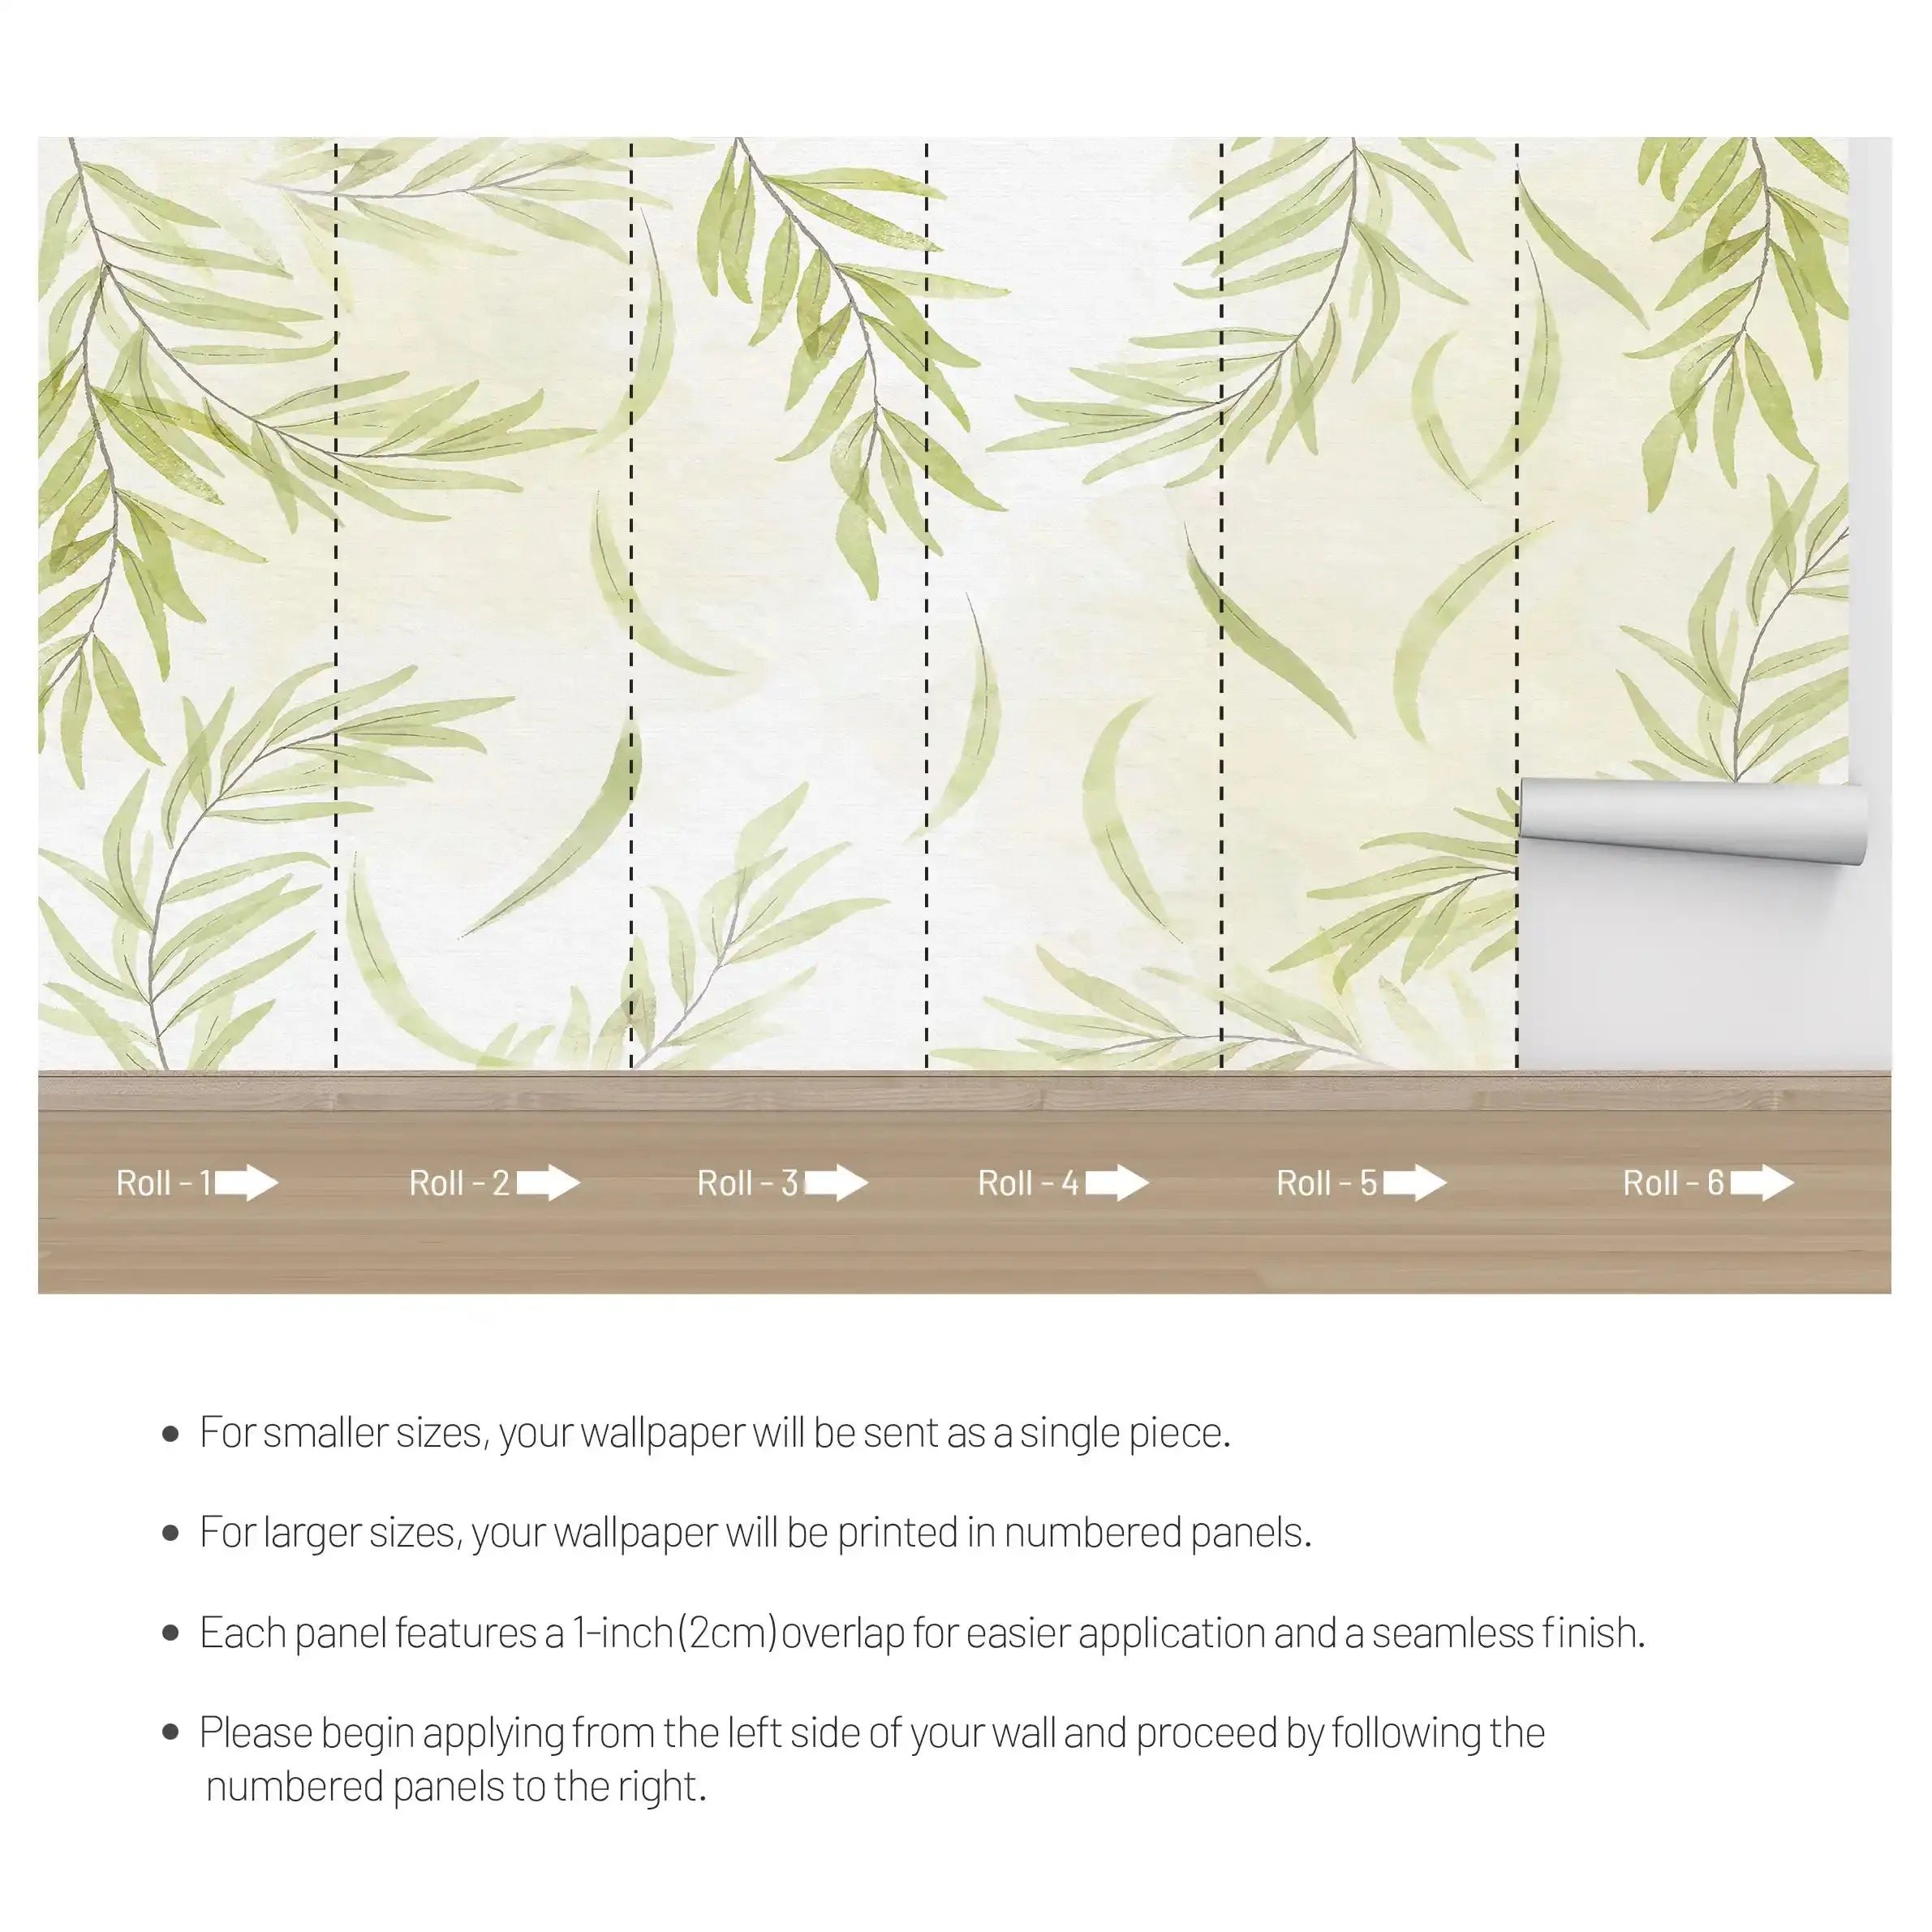 3032-A / Leaf Floral  Peel and Stick Wallpaper: Modern Boho Decor with Watercolor Branches Design, Ideal for Temporary or Renters Wallpaper - Artevella